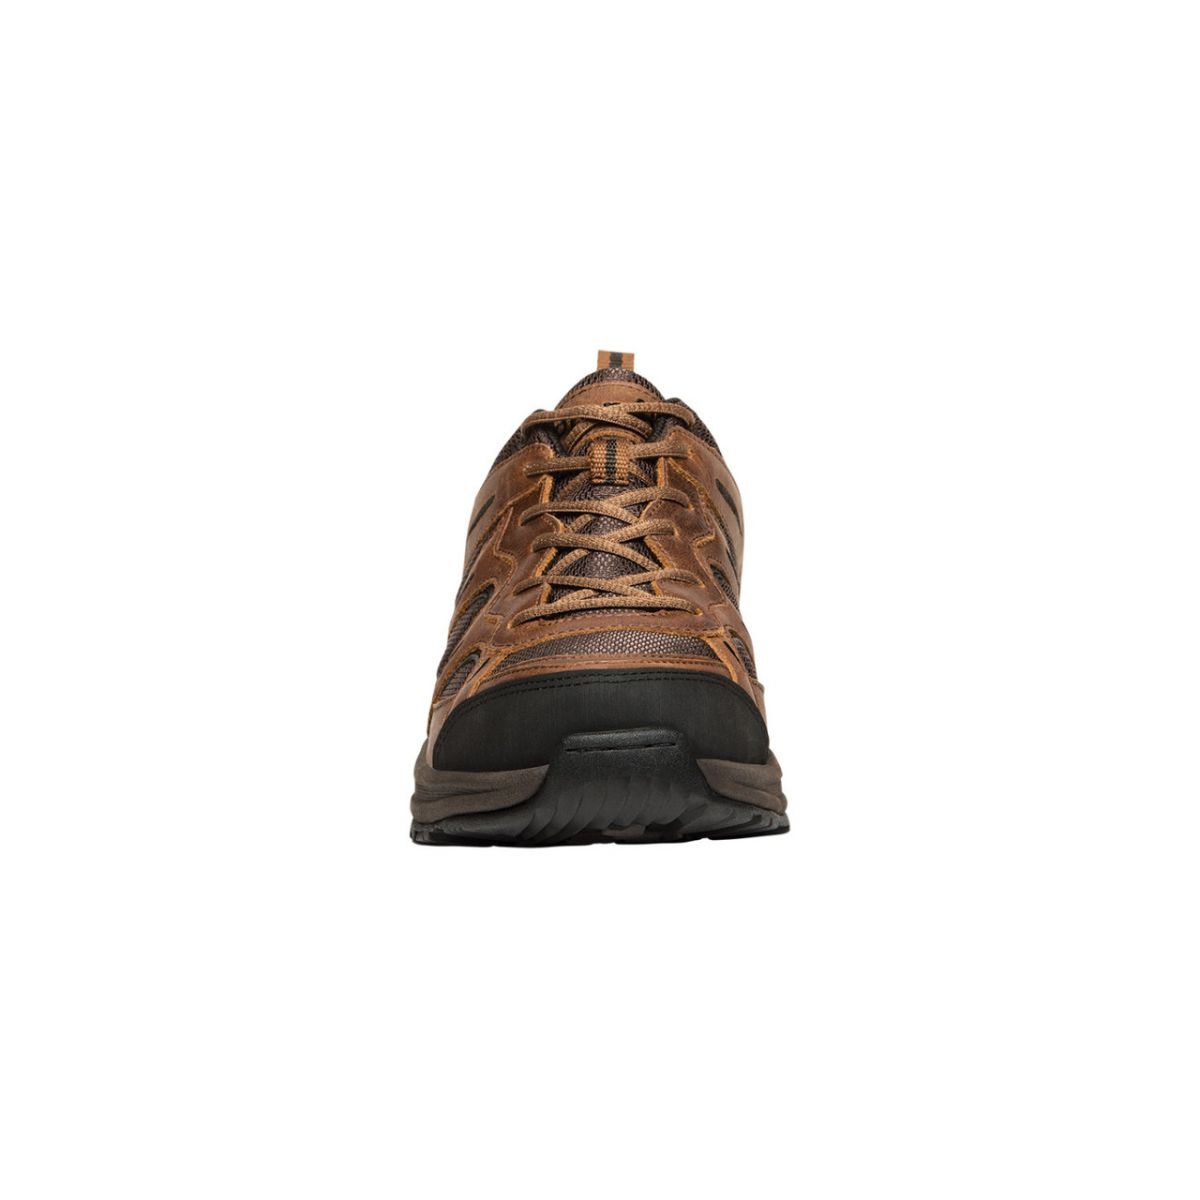 Propet Men's Connelly Hiking Shoe Brown - M5503BR BROWN - BROWN, 10.5-E